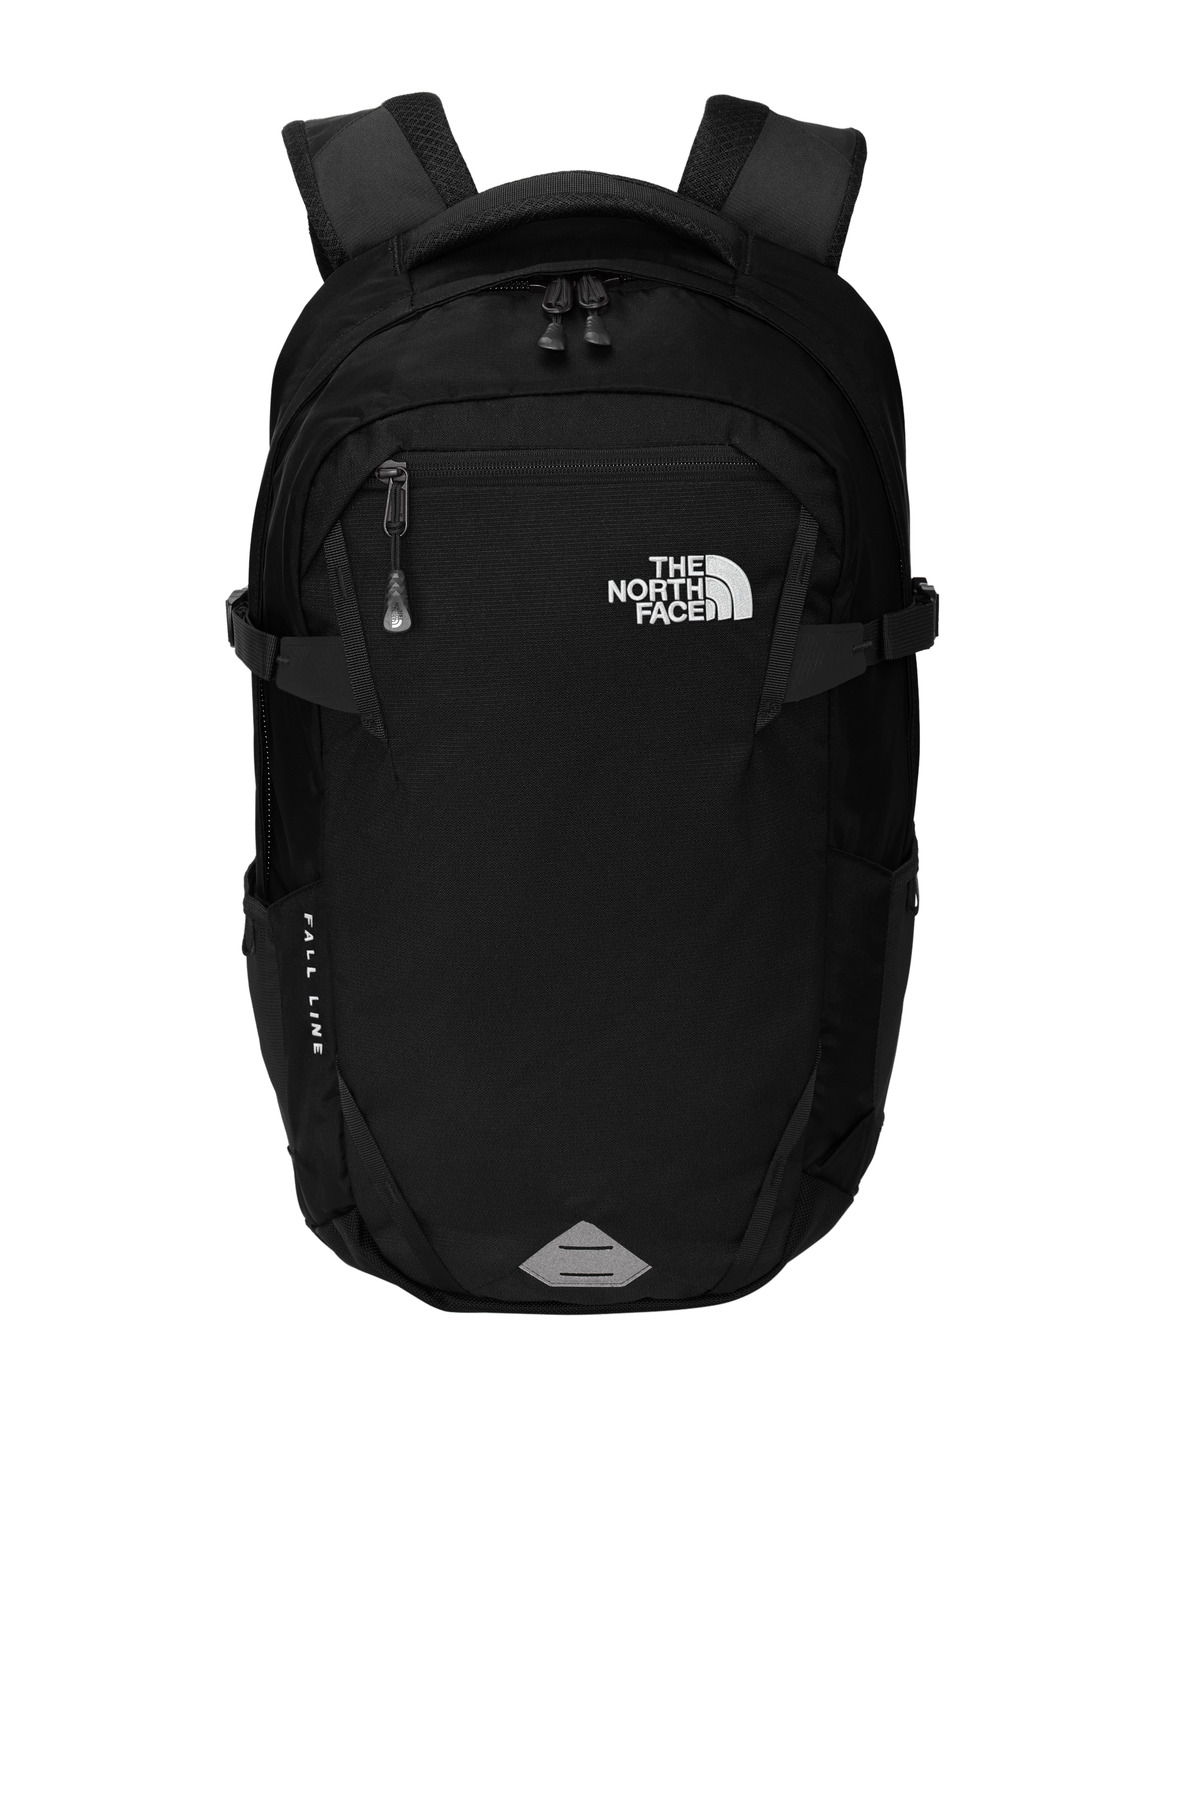 The North Face Hospitality Bags ® Fall Line Backpack.-The North Face